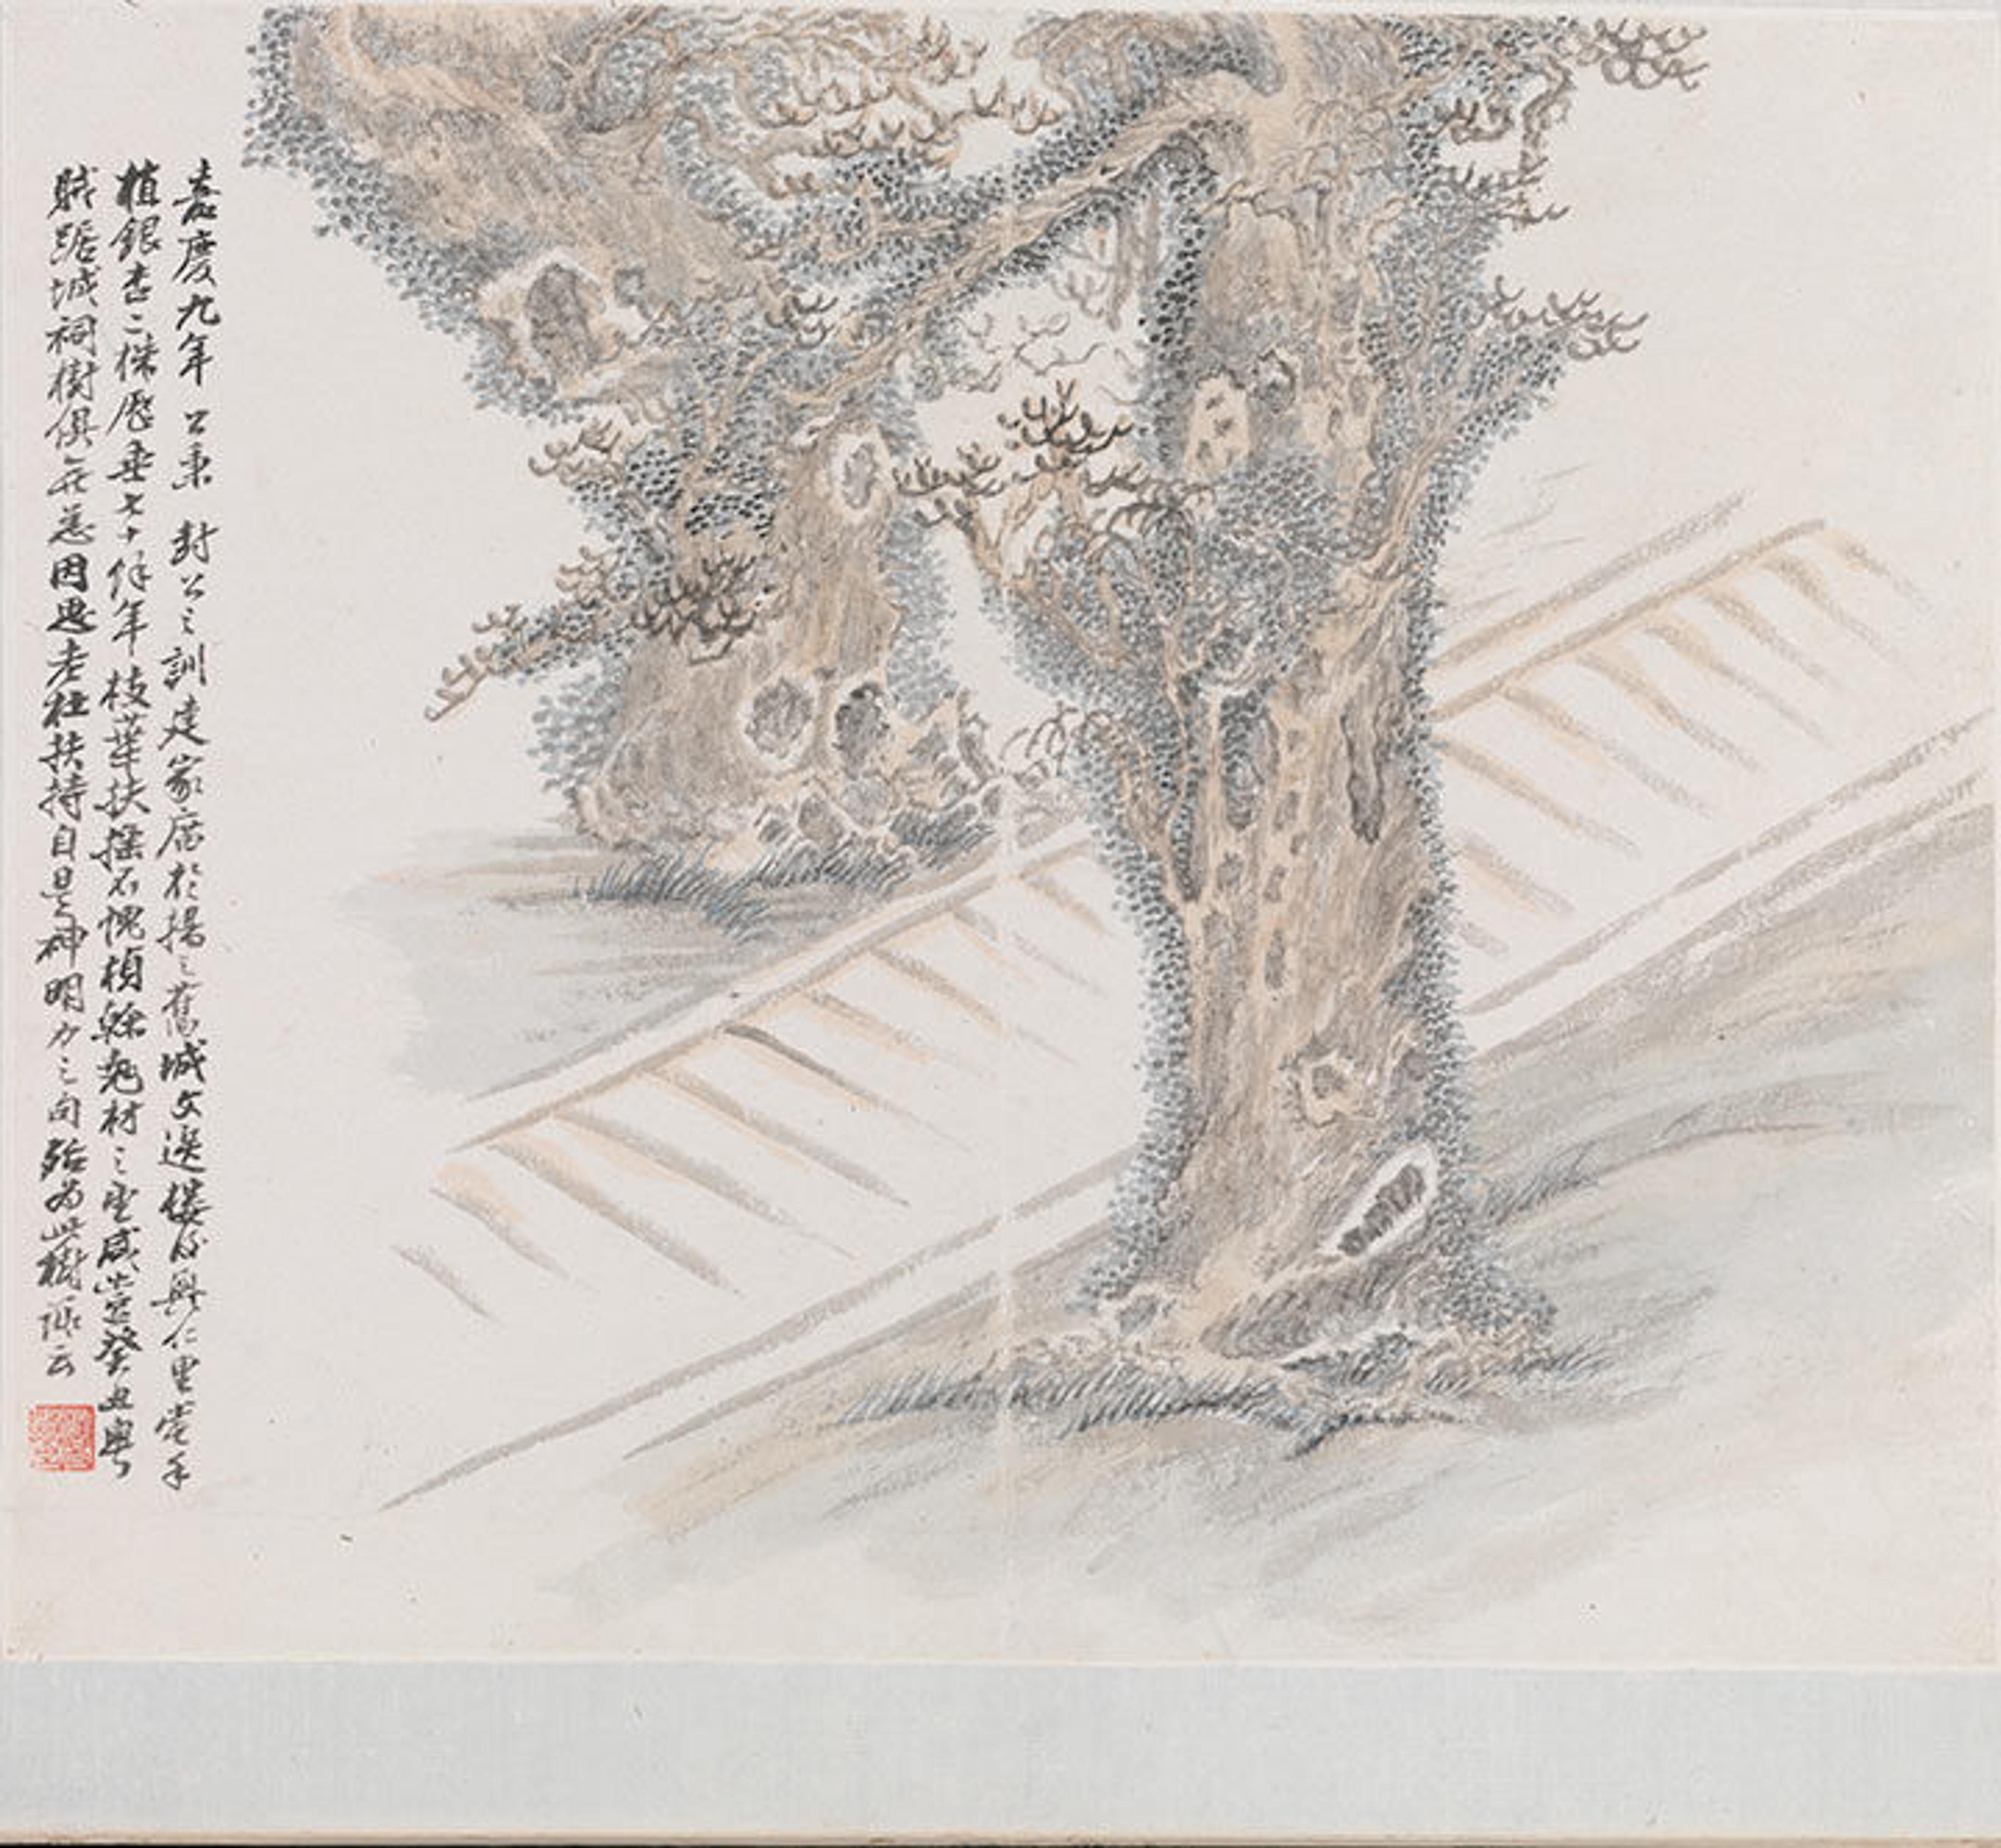 Leaf from an album of paintings, depicting two gingko trees